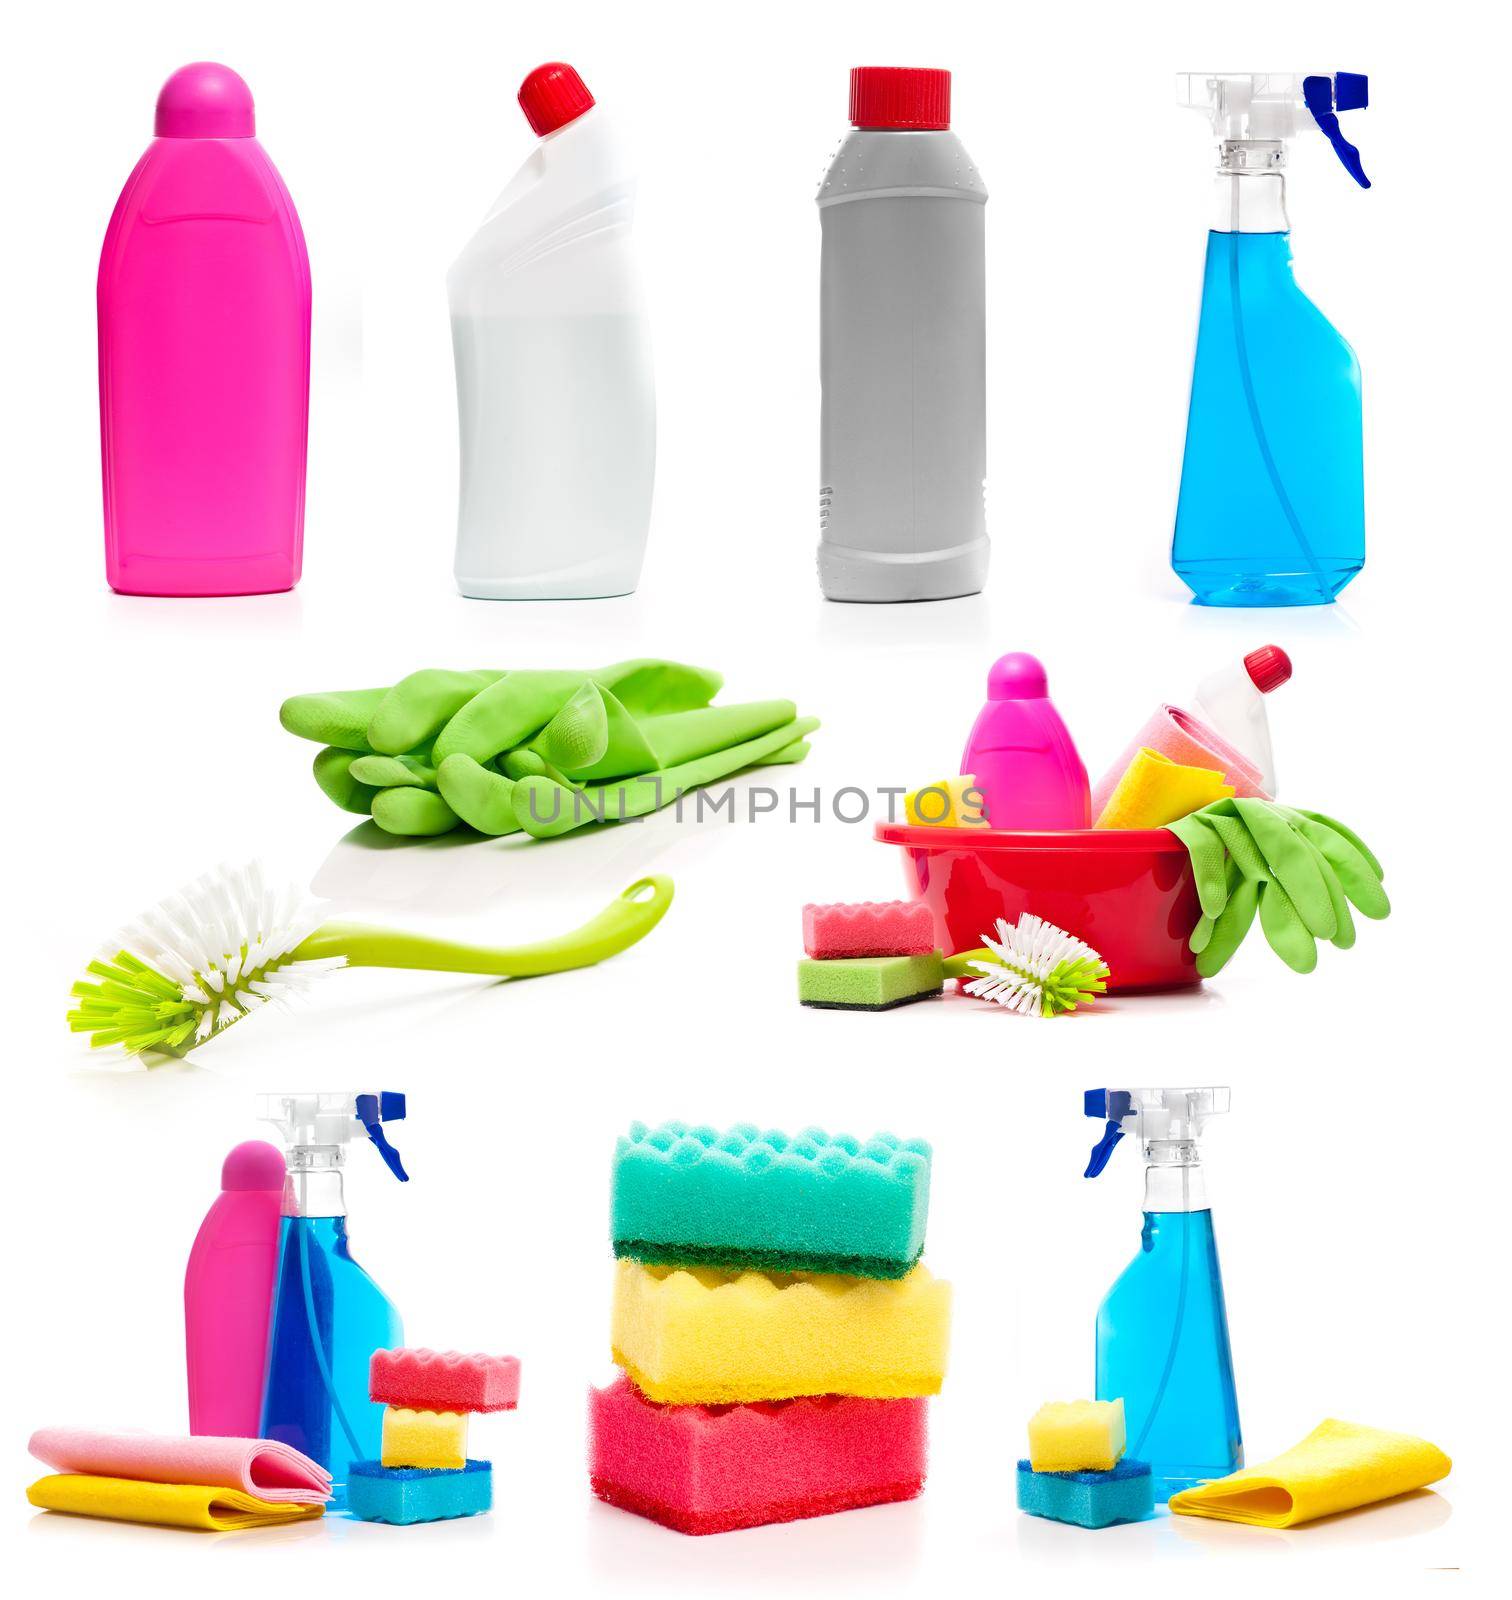 set of cleaning supplies photos isolated on white